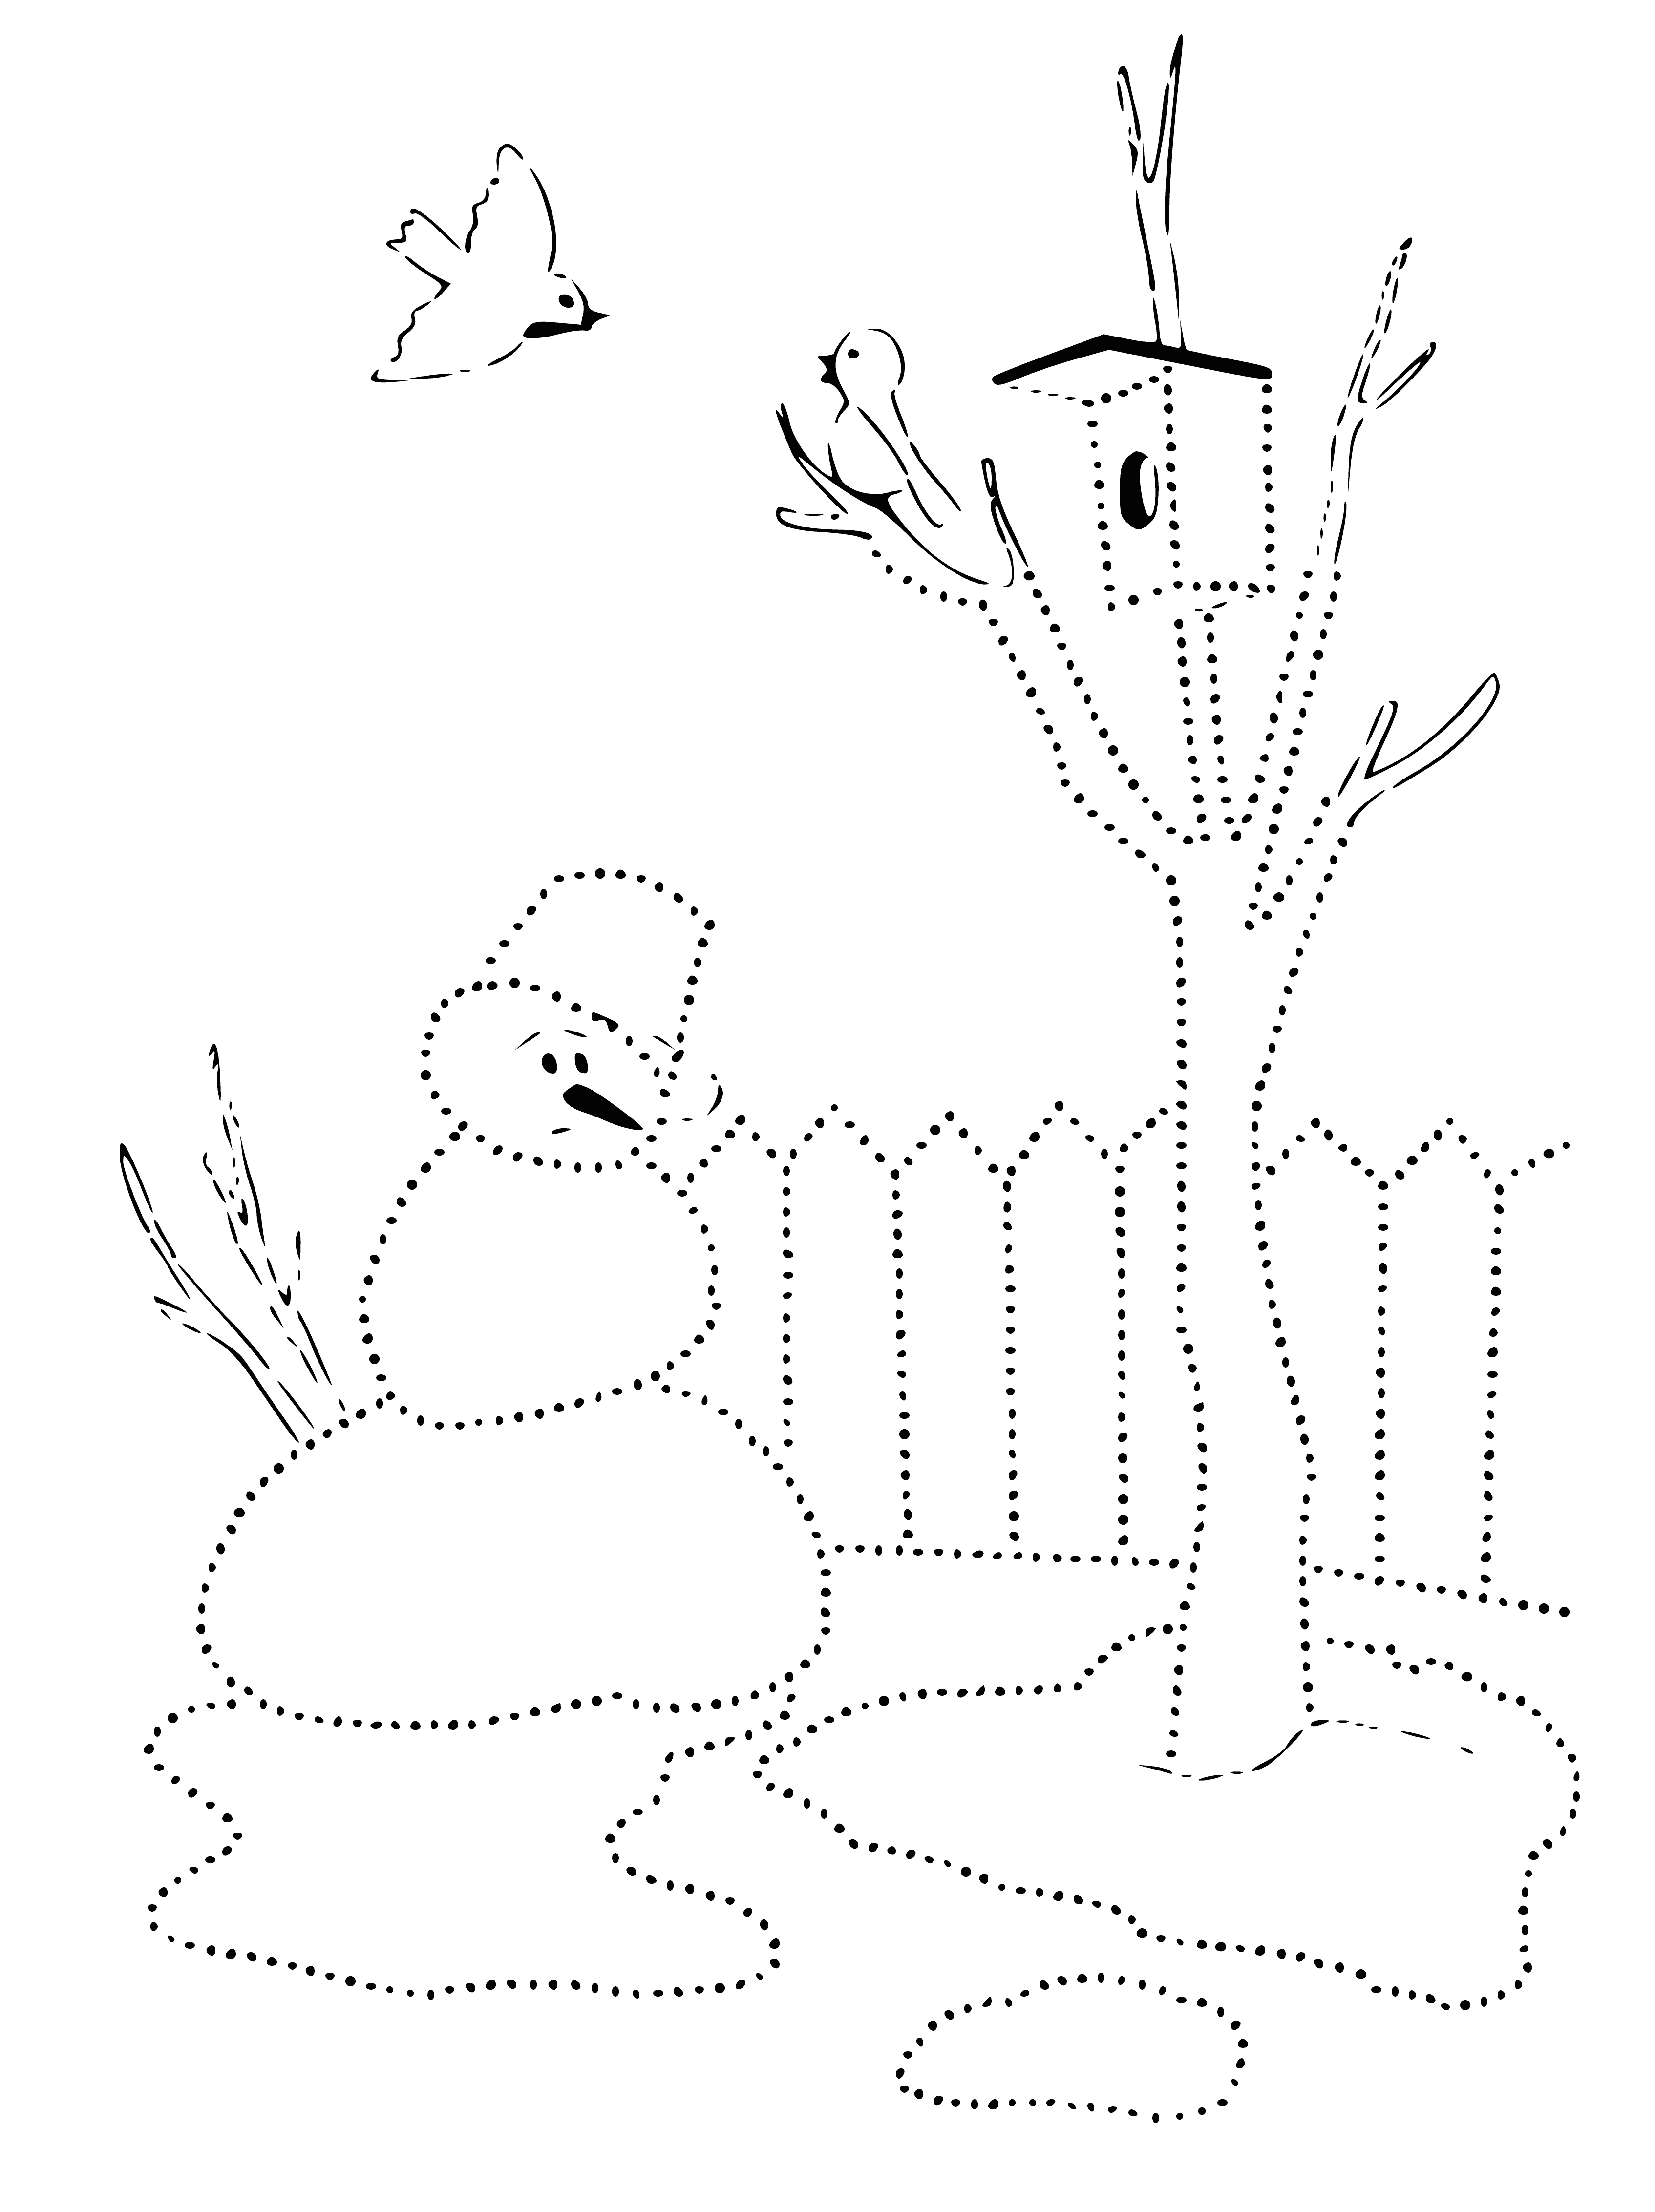 coloring page: Snowman melting in puddle of water surrounded by melting snow in this Spring-themed coloring page.